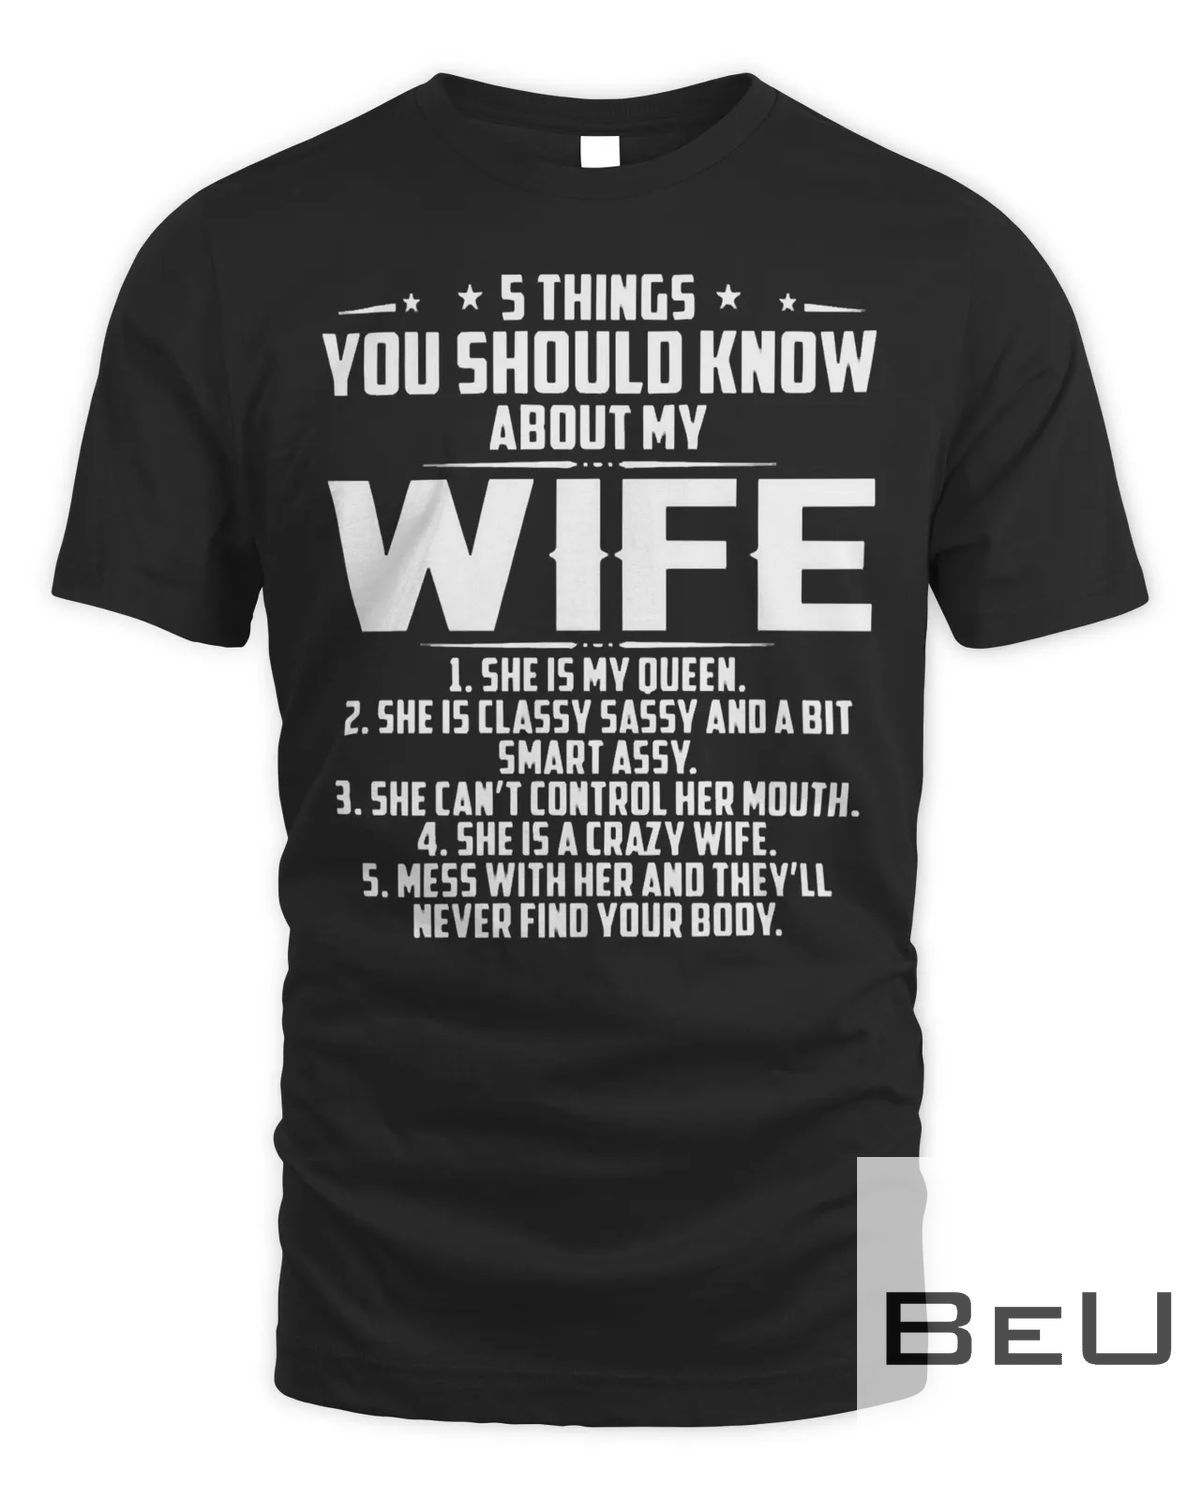 5 Things U Should Know About My Wife T-Shirts T-Shirt